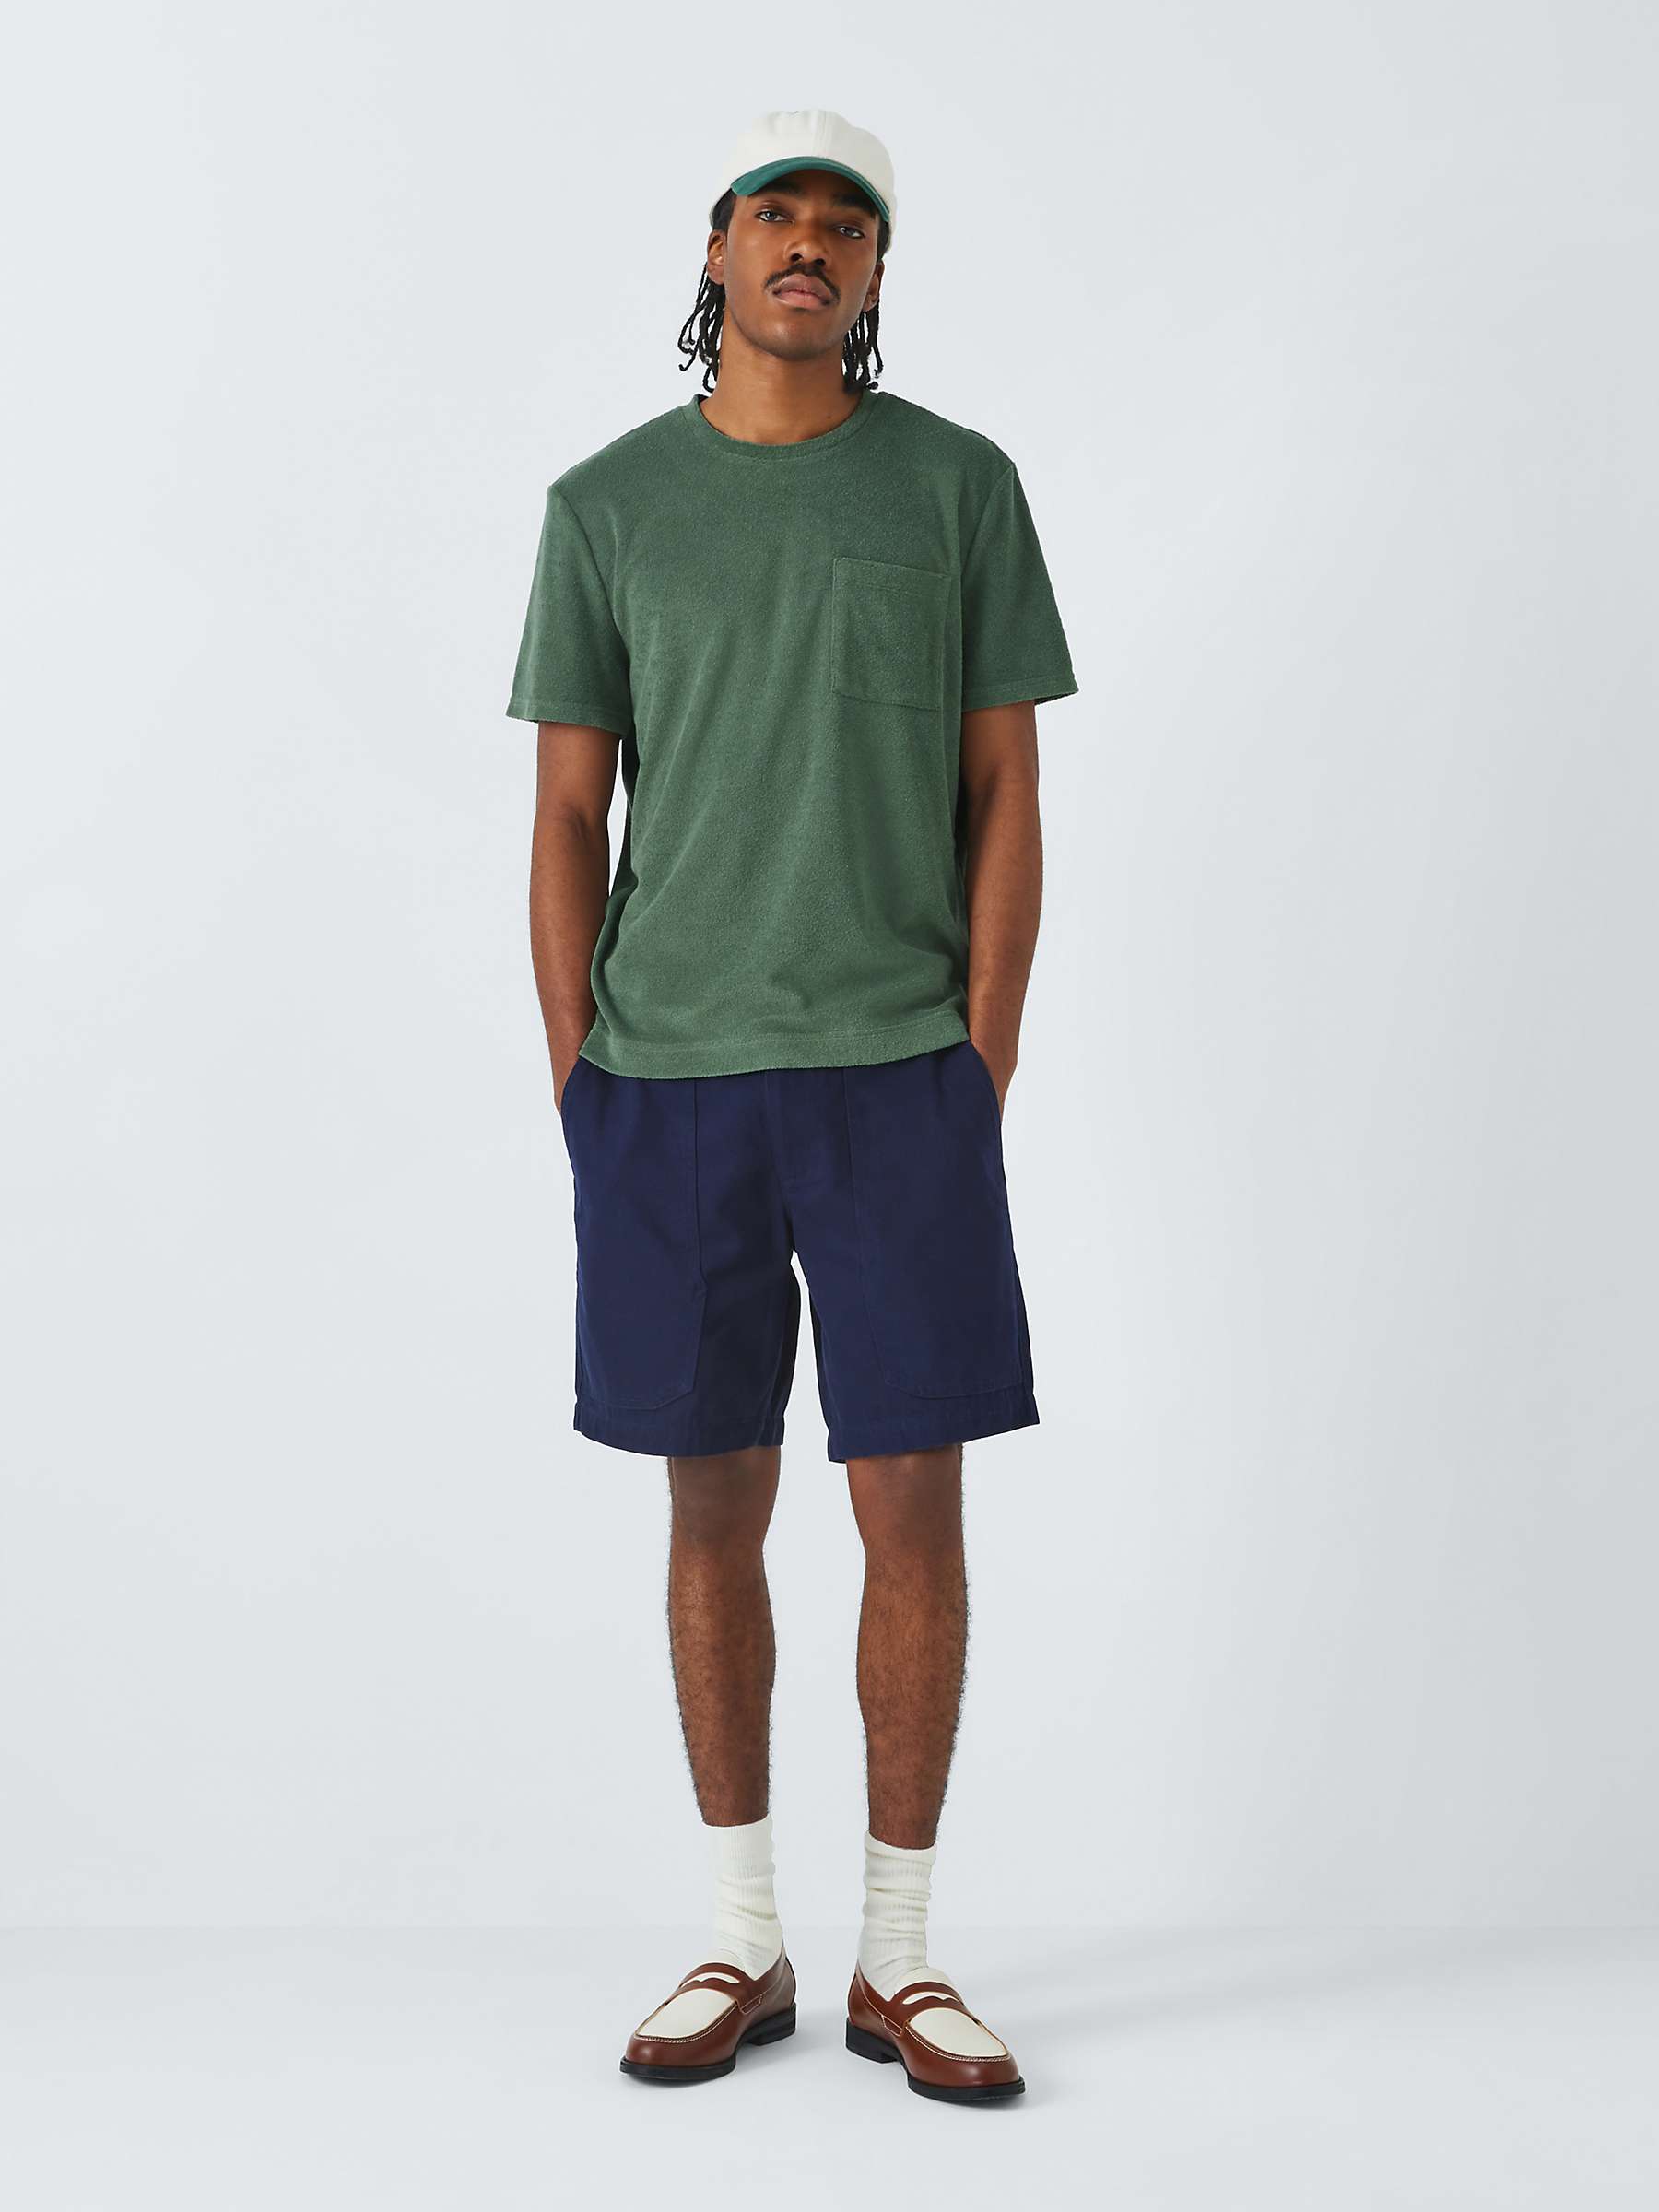 Buy John Lewis ANYDAY Towelling T-Shirt Online at johnlewis.com